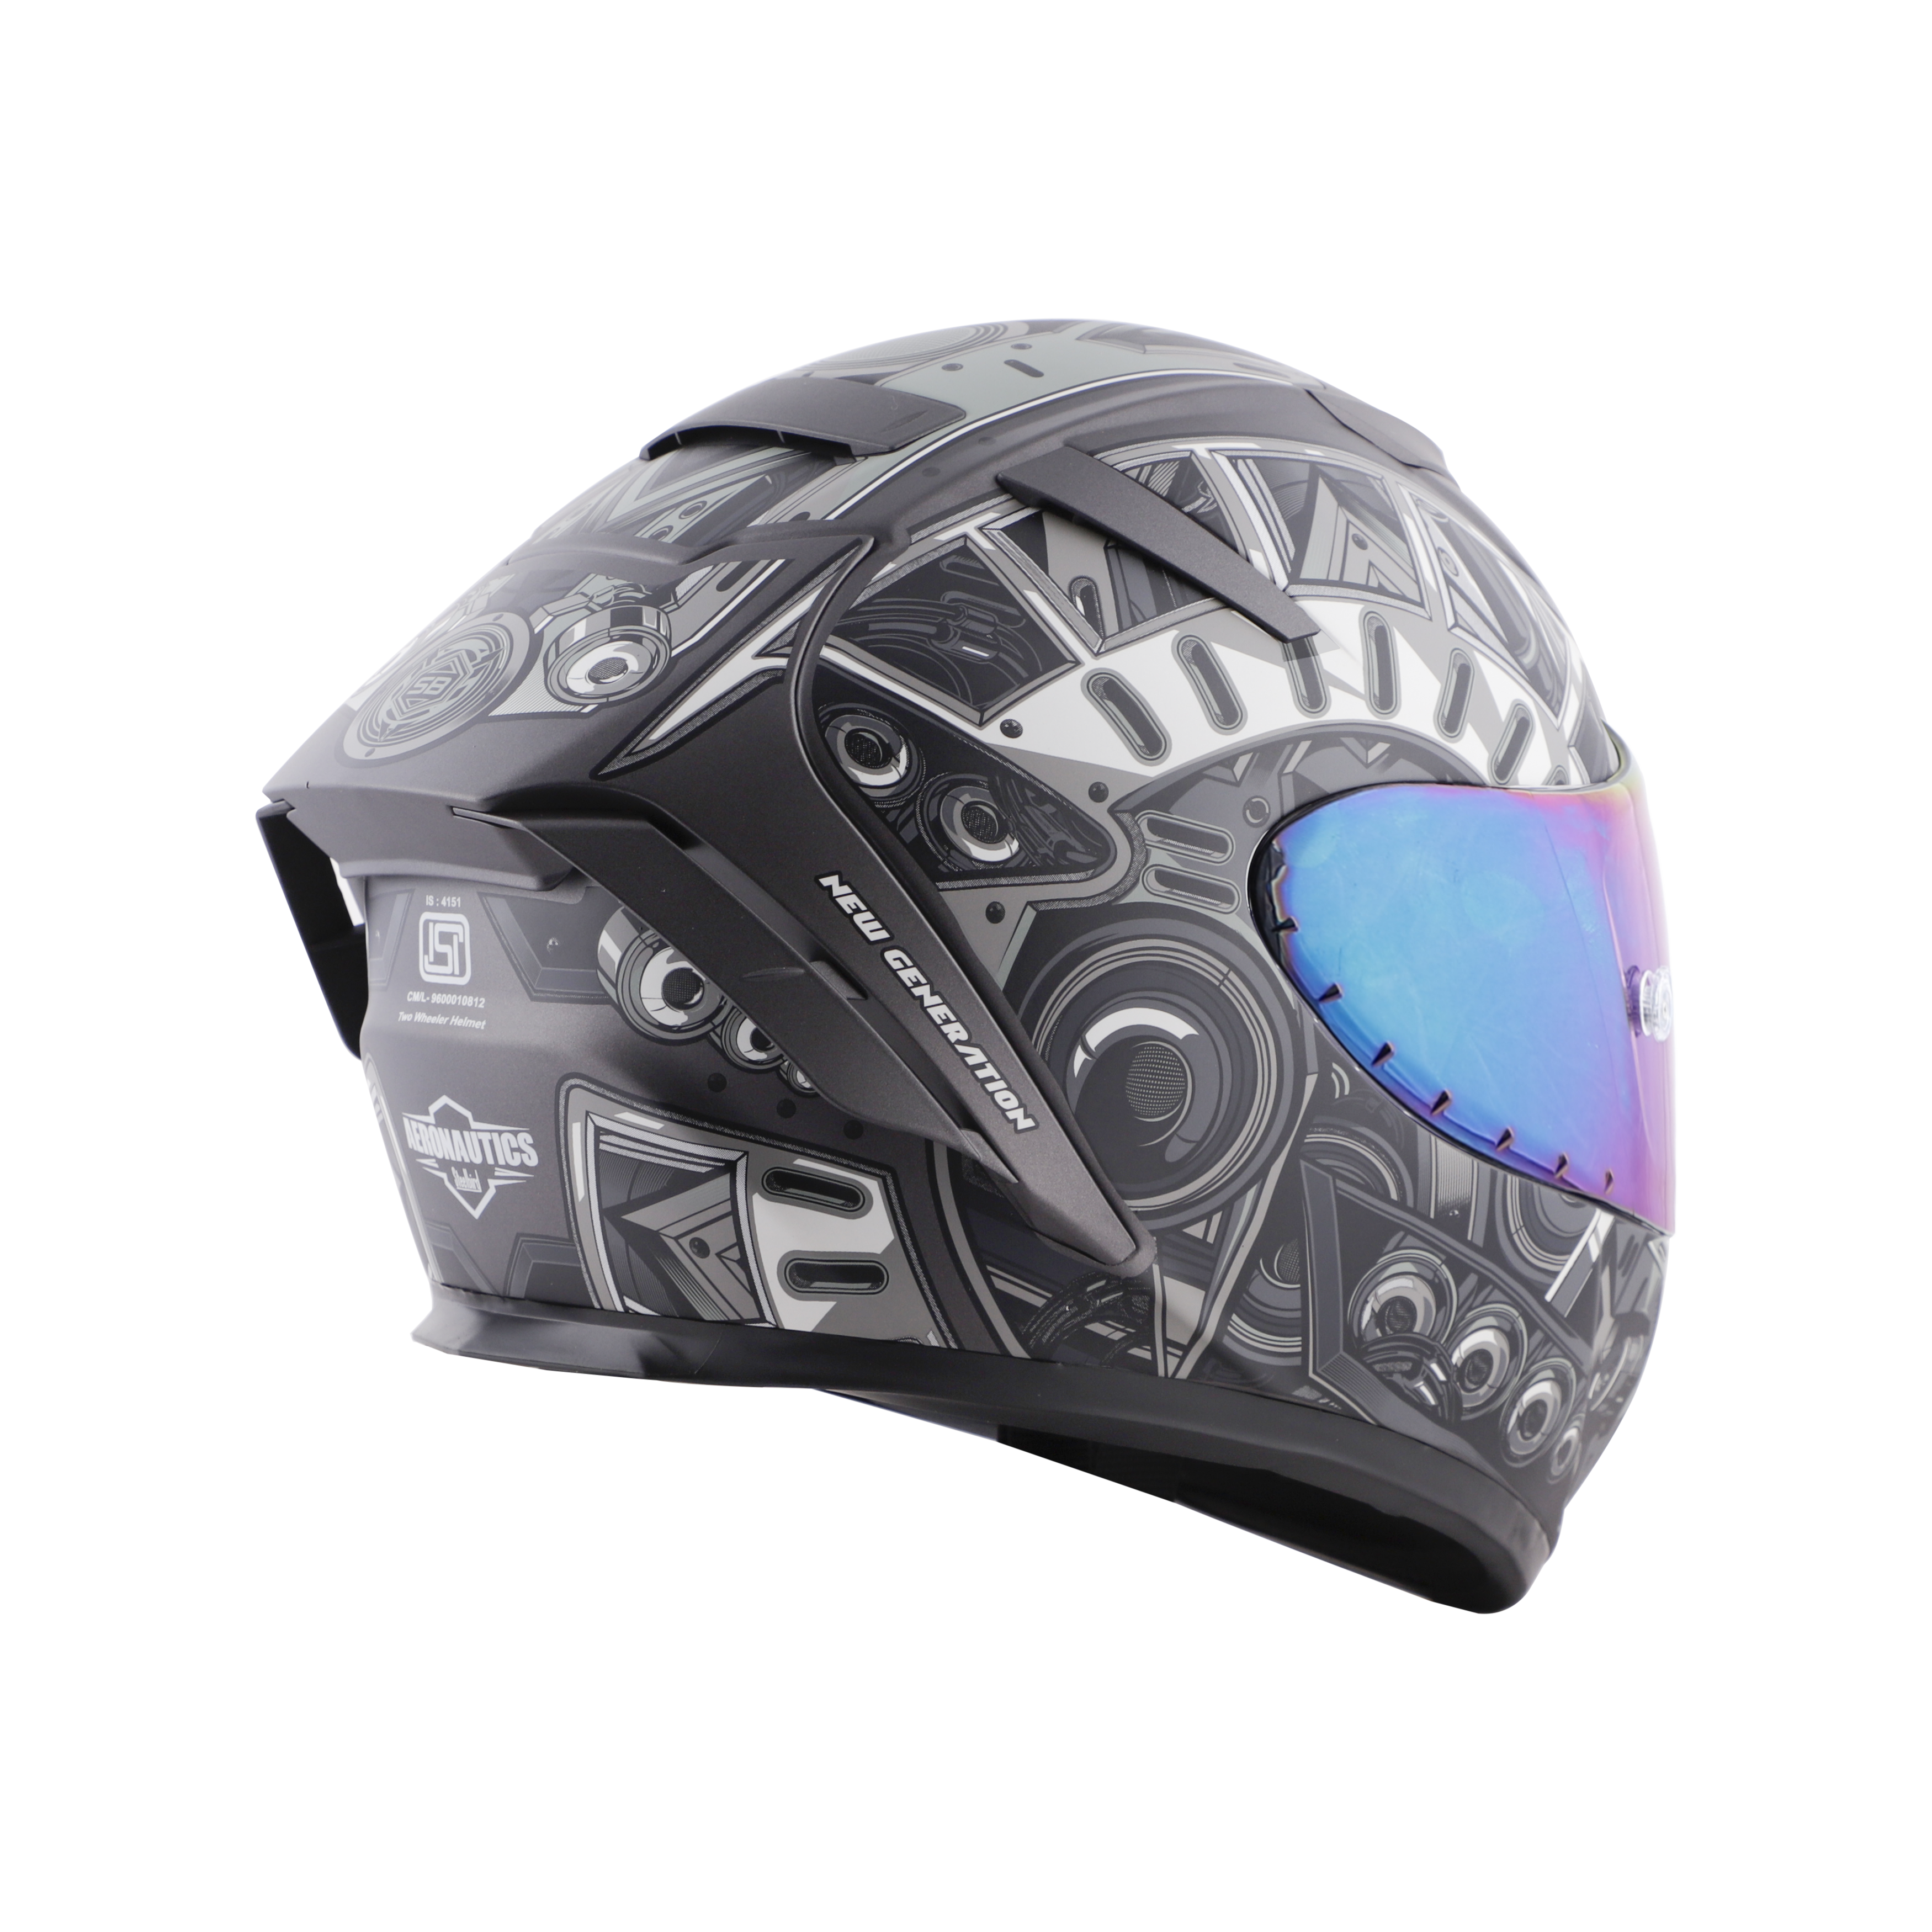 SA-2 TERMINATOR 2.0 MAT H.GREY WITH GREY FITTED WITH CLEAR VISOR EXTRA RAINBOW CHROME VISOR FREE (WITH ANTI-FOG SHIELD HOLDER)